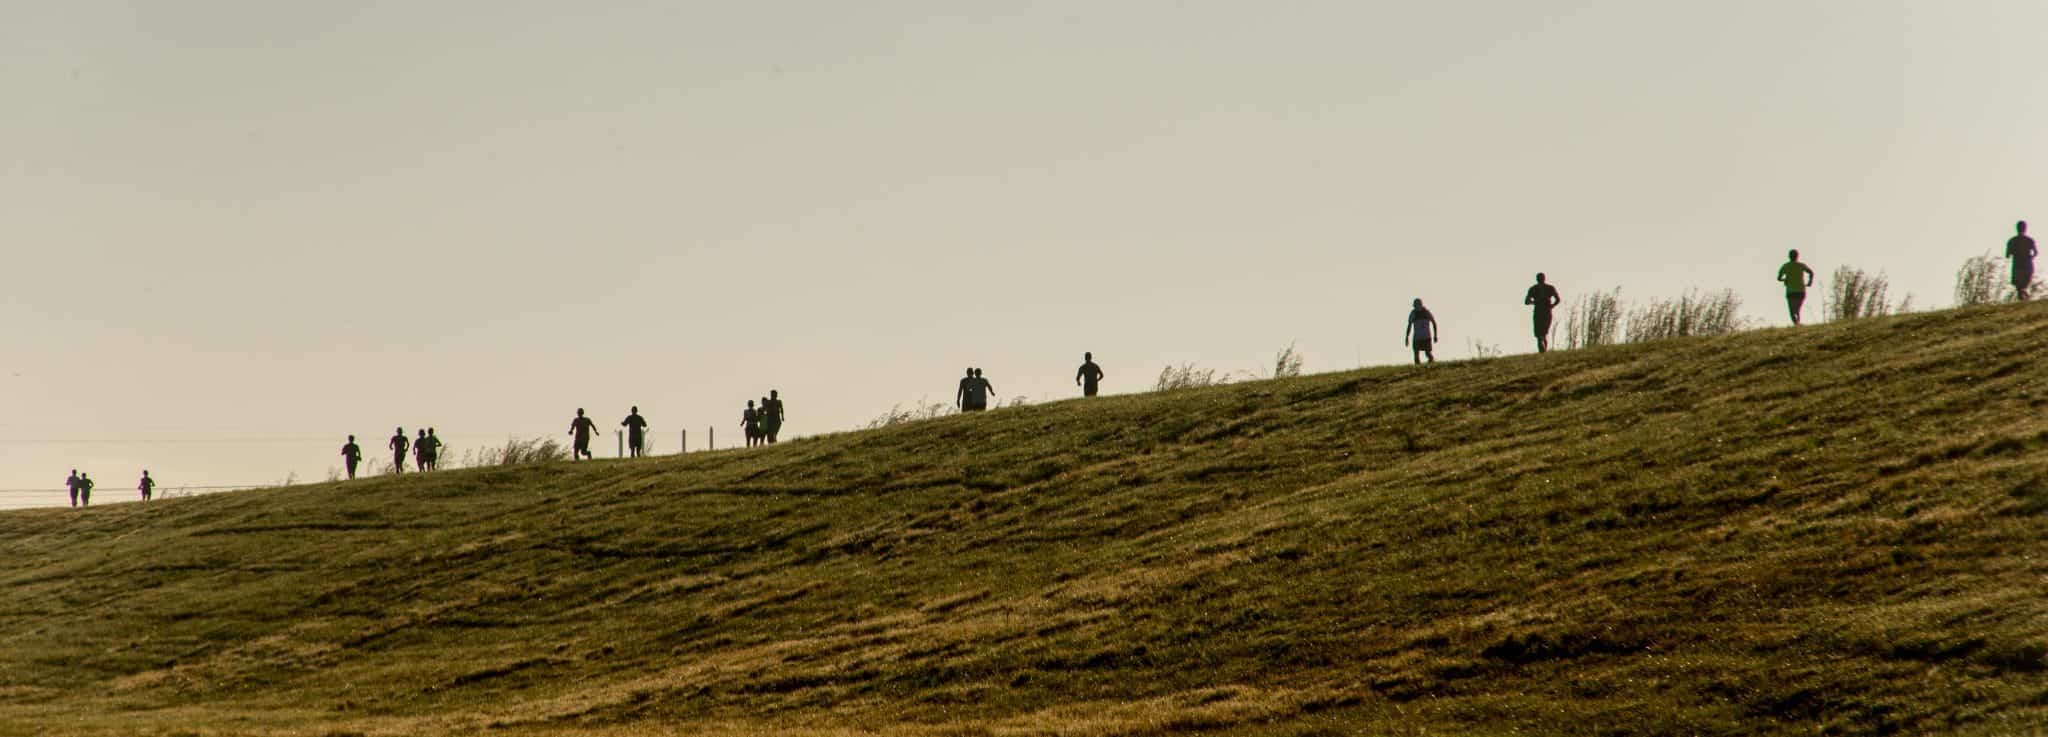 Image of about twenty ultra marathon participants running over a hill